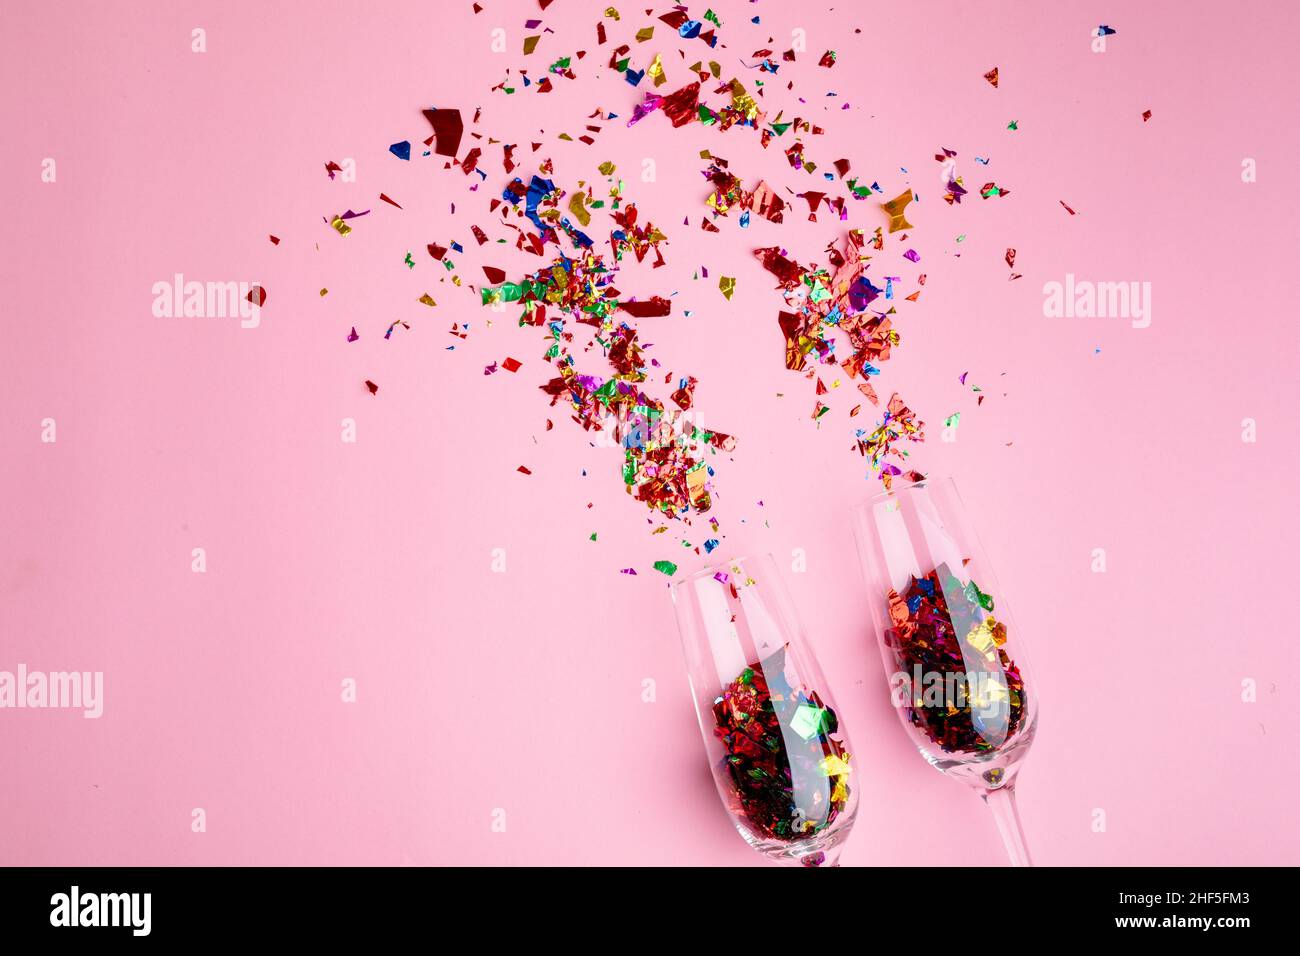 https://c8.alamy.com/comp/2HF5FM3/multi-colored-confetti-and-champagne-flutes-isolated-against-pink-background-copy-space-2HF5FM3.jpg